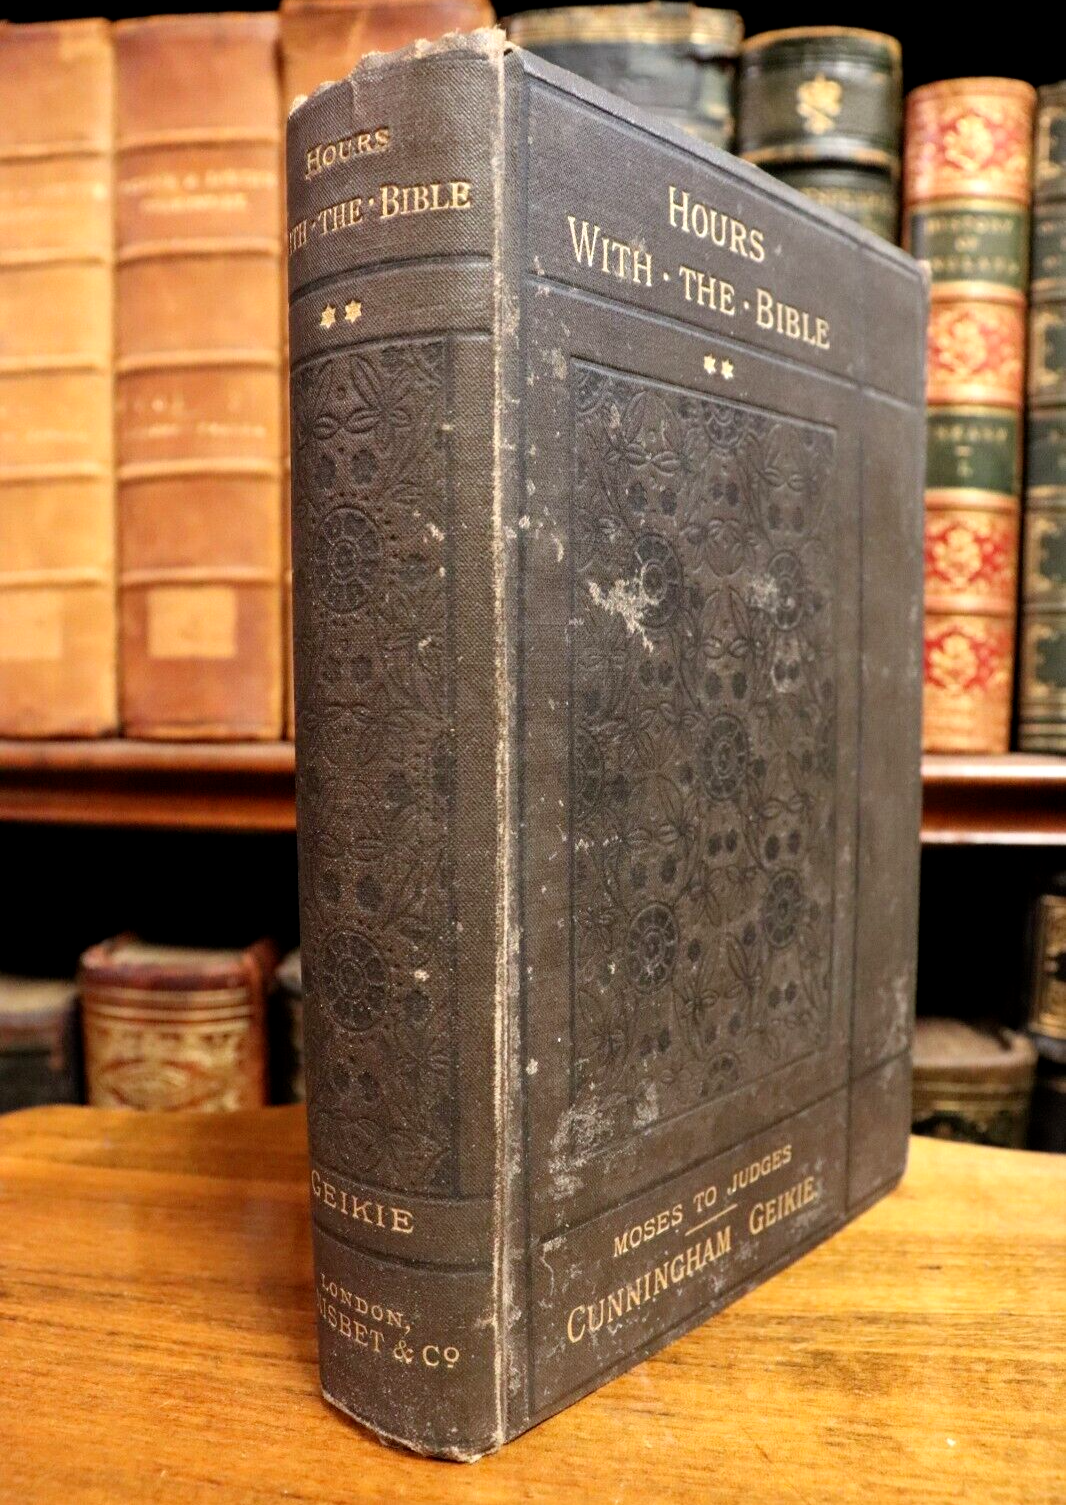 c1890 Hours With The Bible by Cunningham Geikie Antique Theology Book 1st Ed.